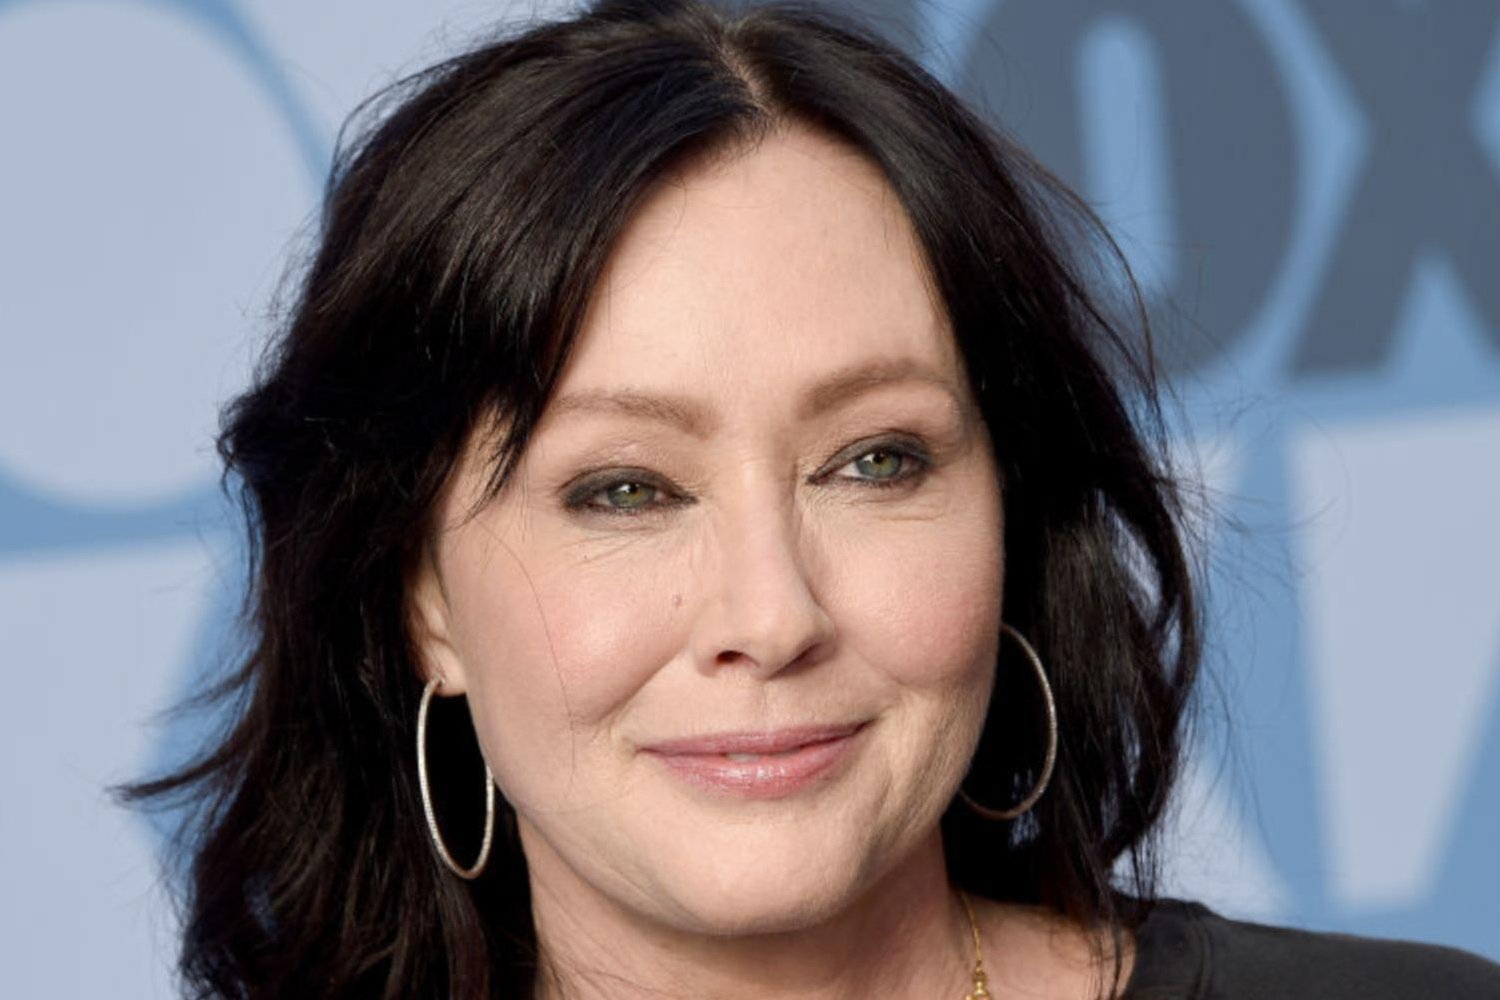 Charmed Star Shannen Doherty Has Died at Age 53